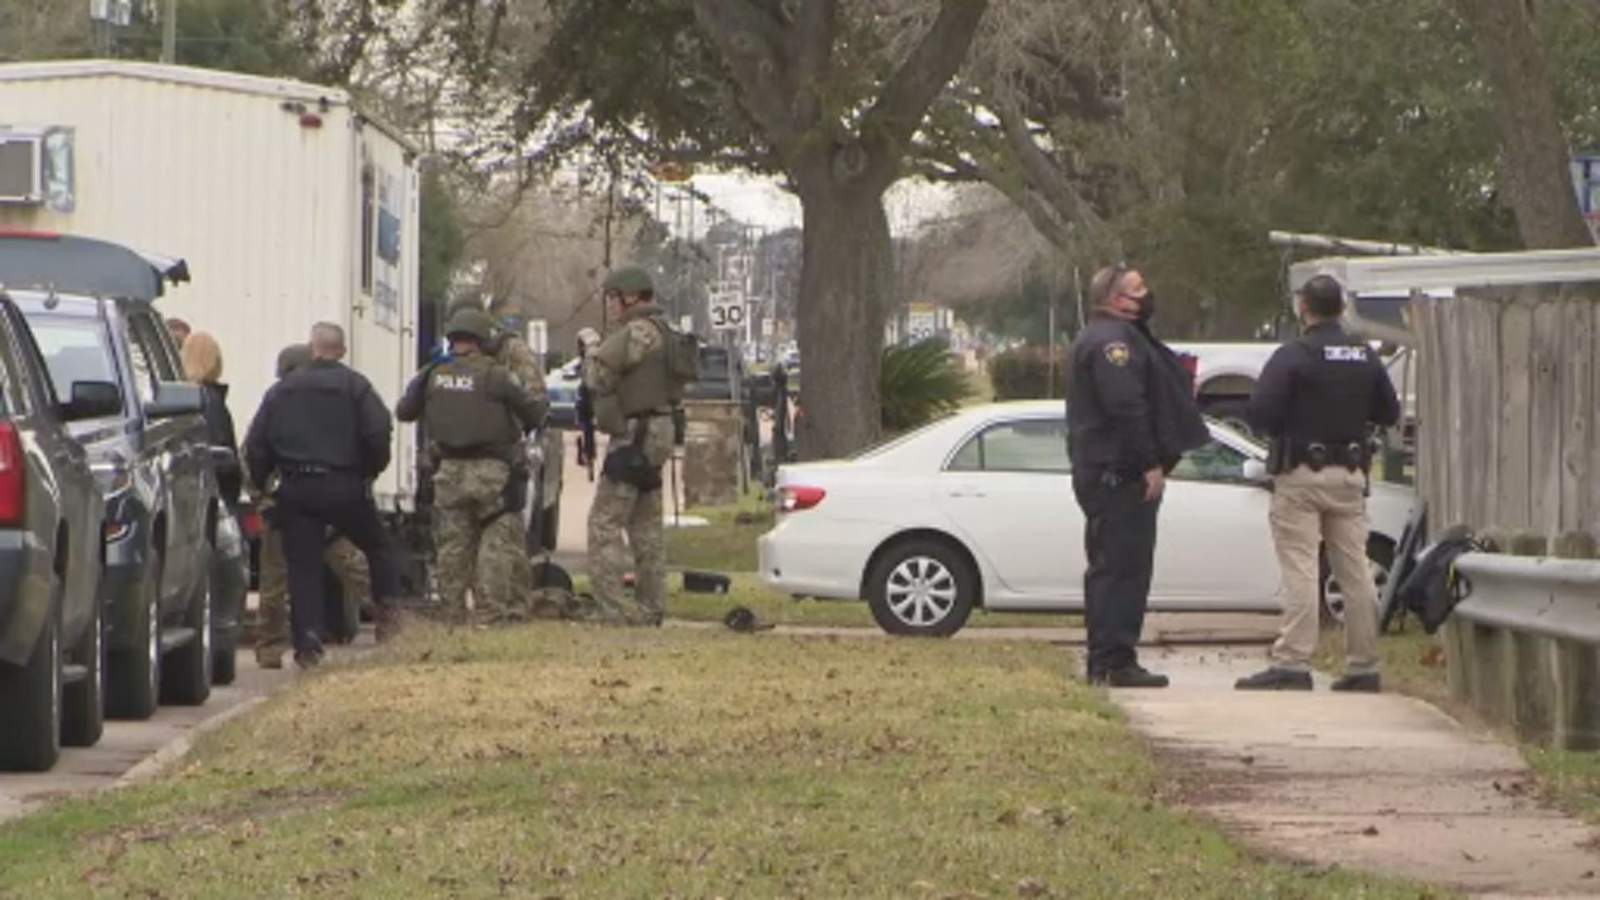 SWAT officers called to eviction scene in Deer Park after person pulls gun, police say